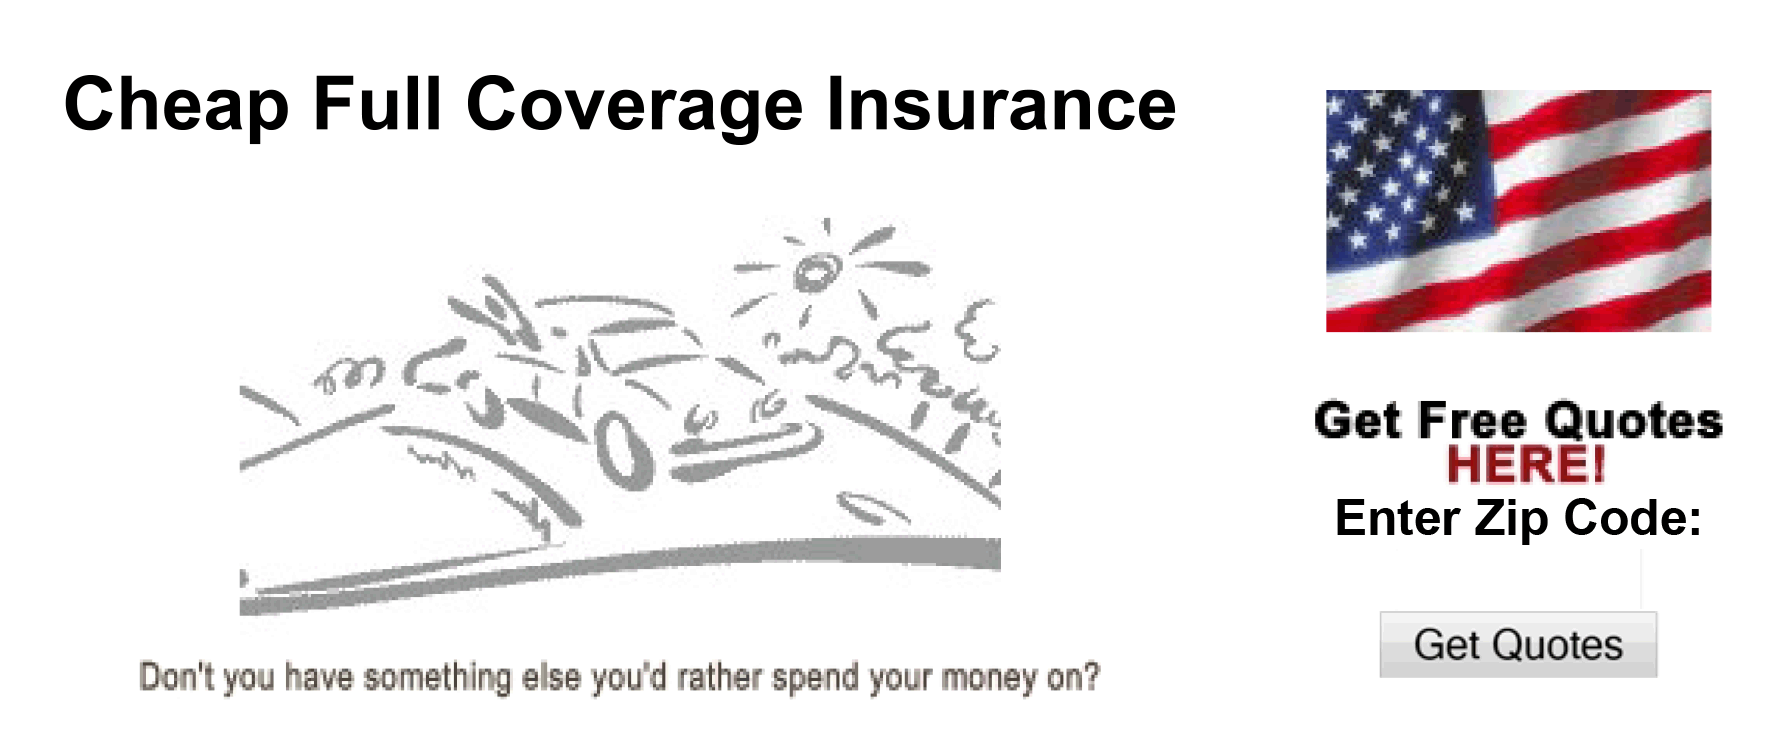 Quotes For Full Coverage Insurance With In Pennsylvania